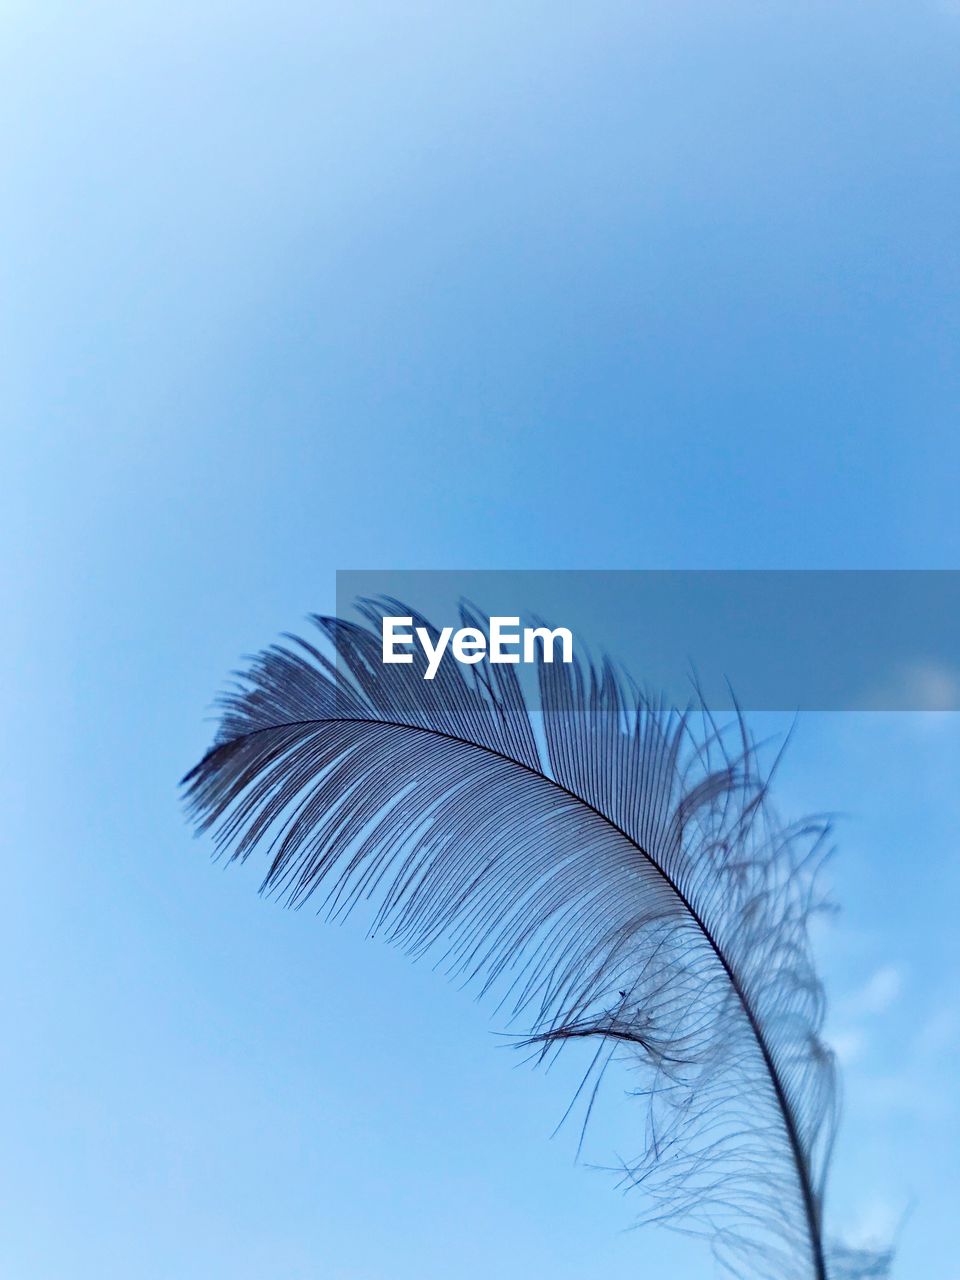 CLOSE-UP OF FEATHER AGAINST BLUE SKY